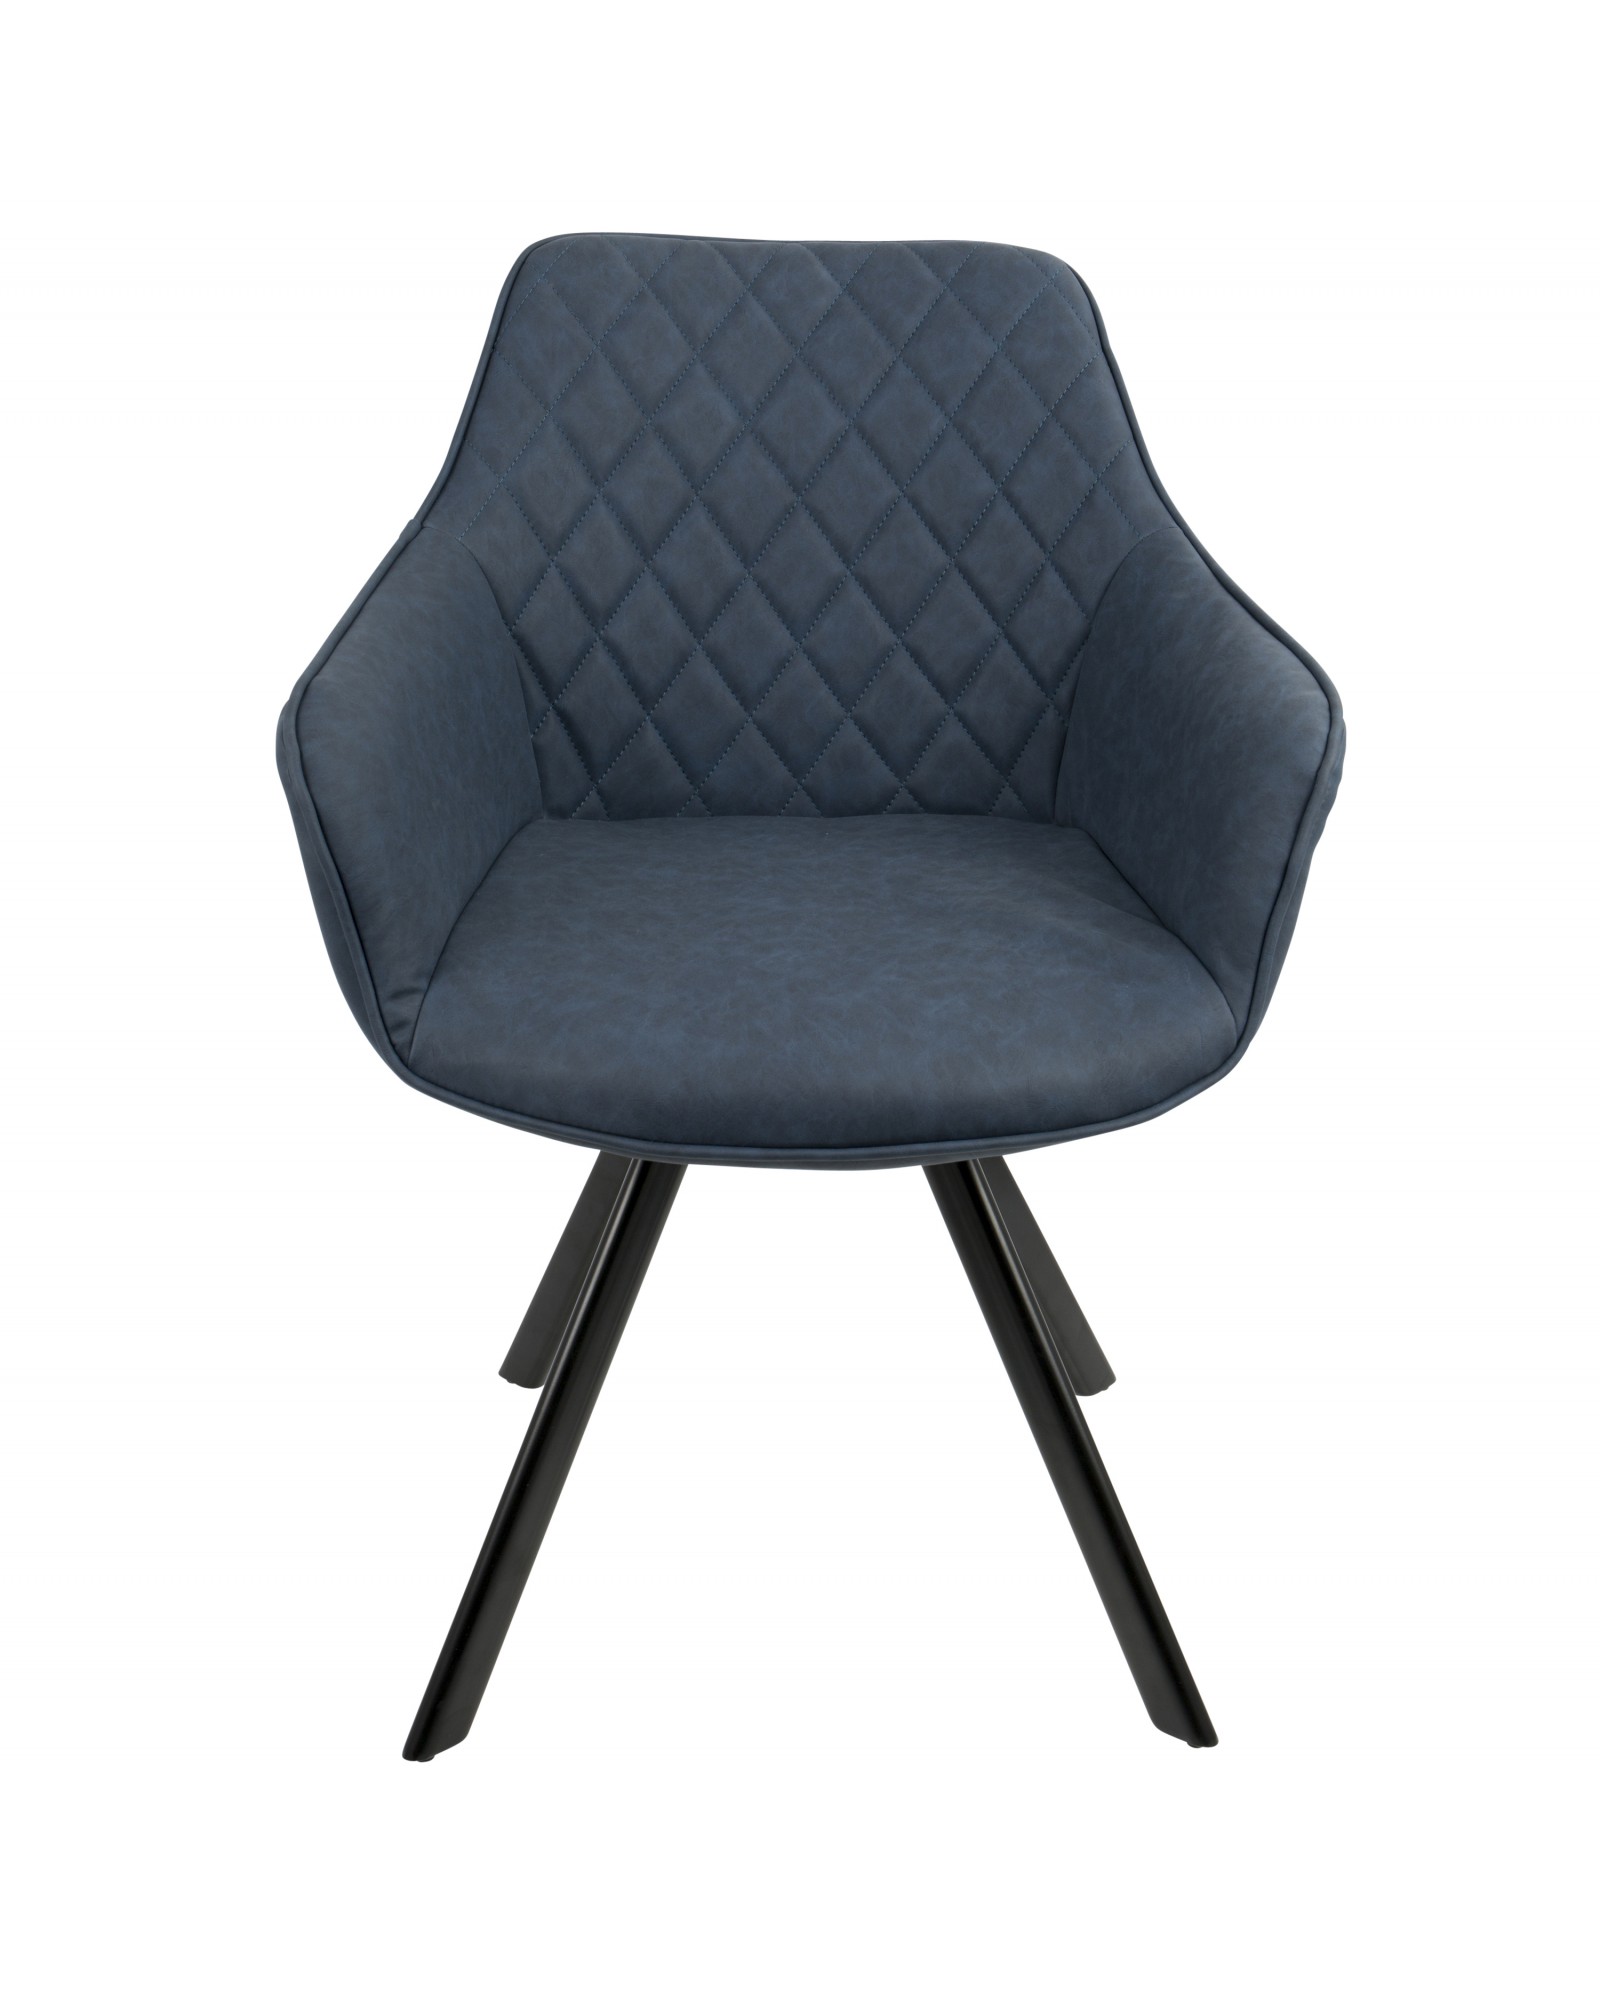 Outlaw Industrial Dining/Accent Chair in Blue Faux Leather - Set of 2